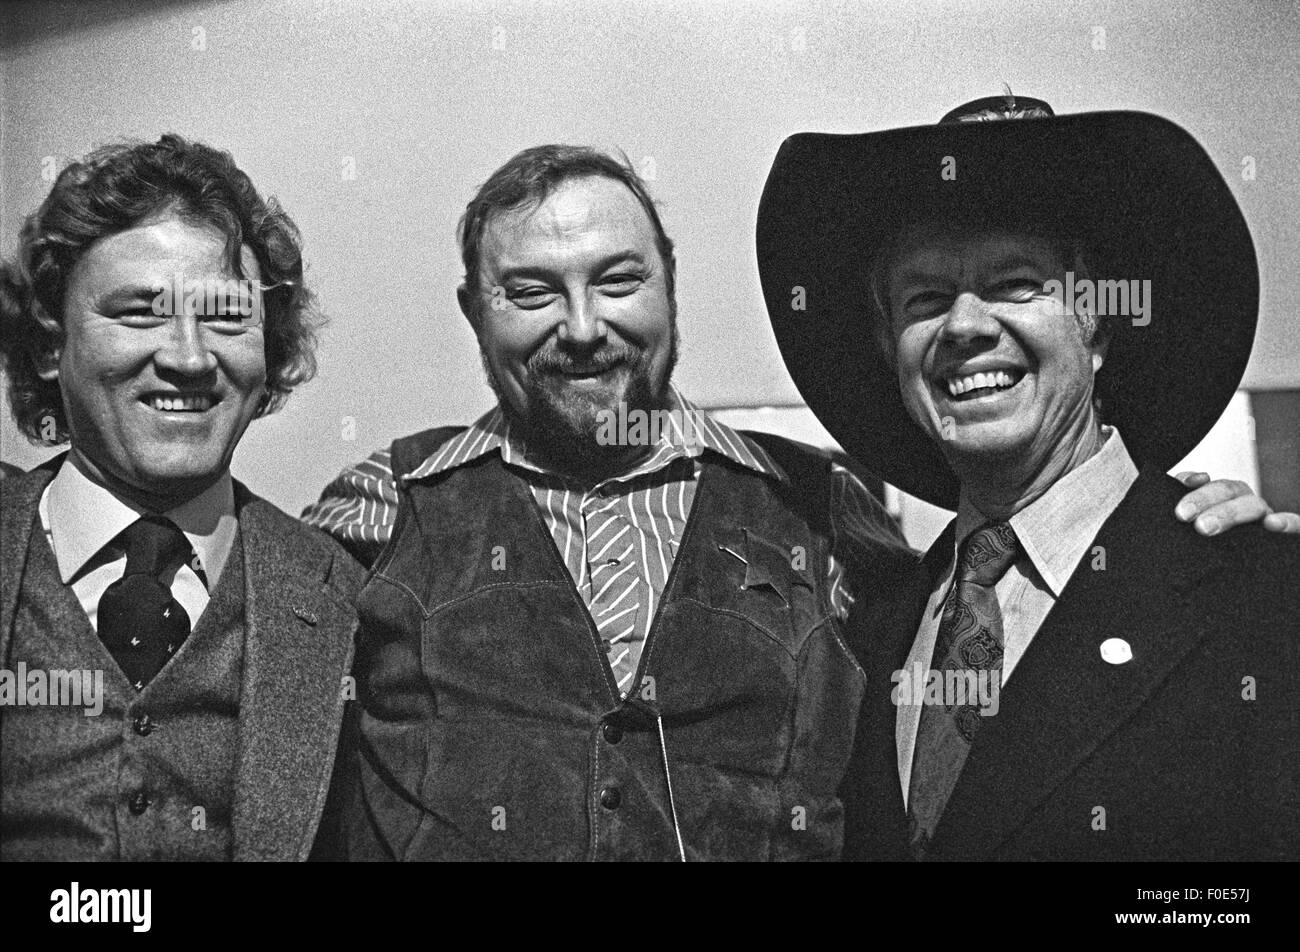 Atlanta, Georgia, USA. 1st Jan, 2015. 1976 Democratic presidential nominee Jimmy Carter wears the hat of country music performer Charlie Daniels (middle). At left is Carter friend and early supporter, Phil Walden, founder of Capricorn Records of Macon, Georgia. Daniels was playing a fundraiser at Atlanta's historic Fox Theater to benefit Carter's campaign. © Ken Hawkins/ZUMA Wire/Alamy Live News Stock Photo